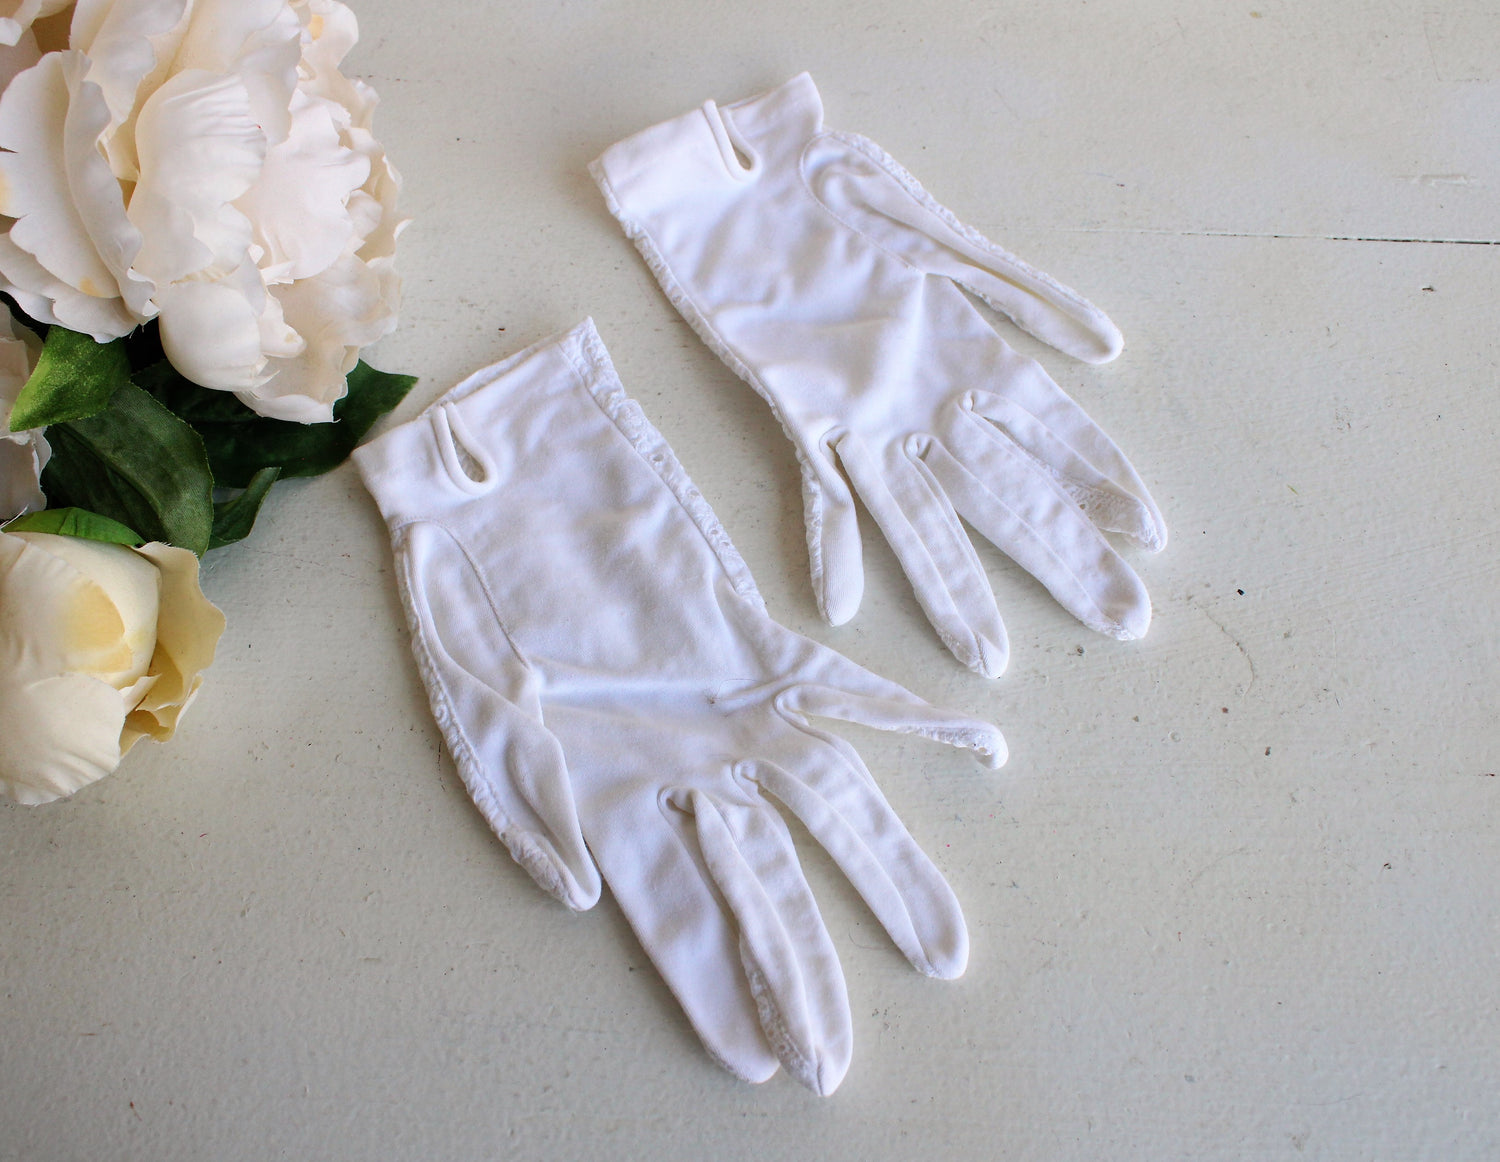 Vintage 1950s 1960s White Gloves with Floral Eyelet